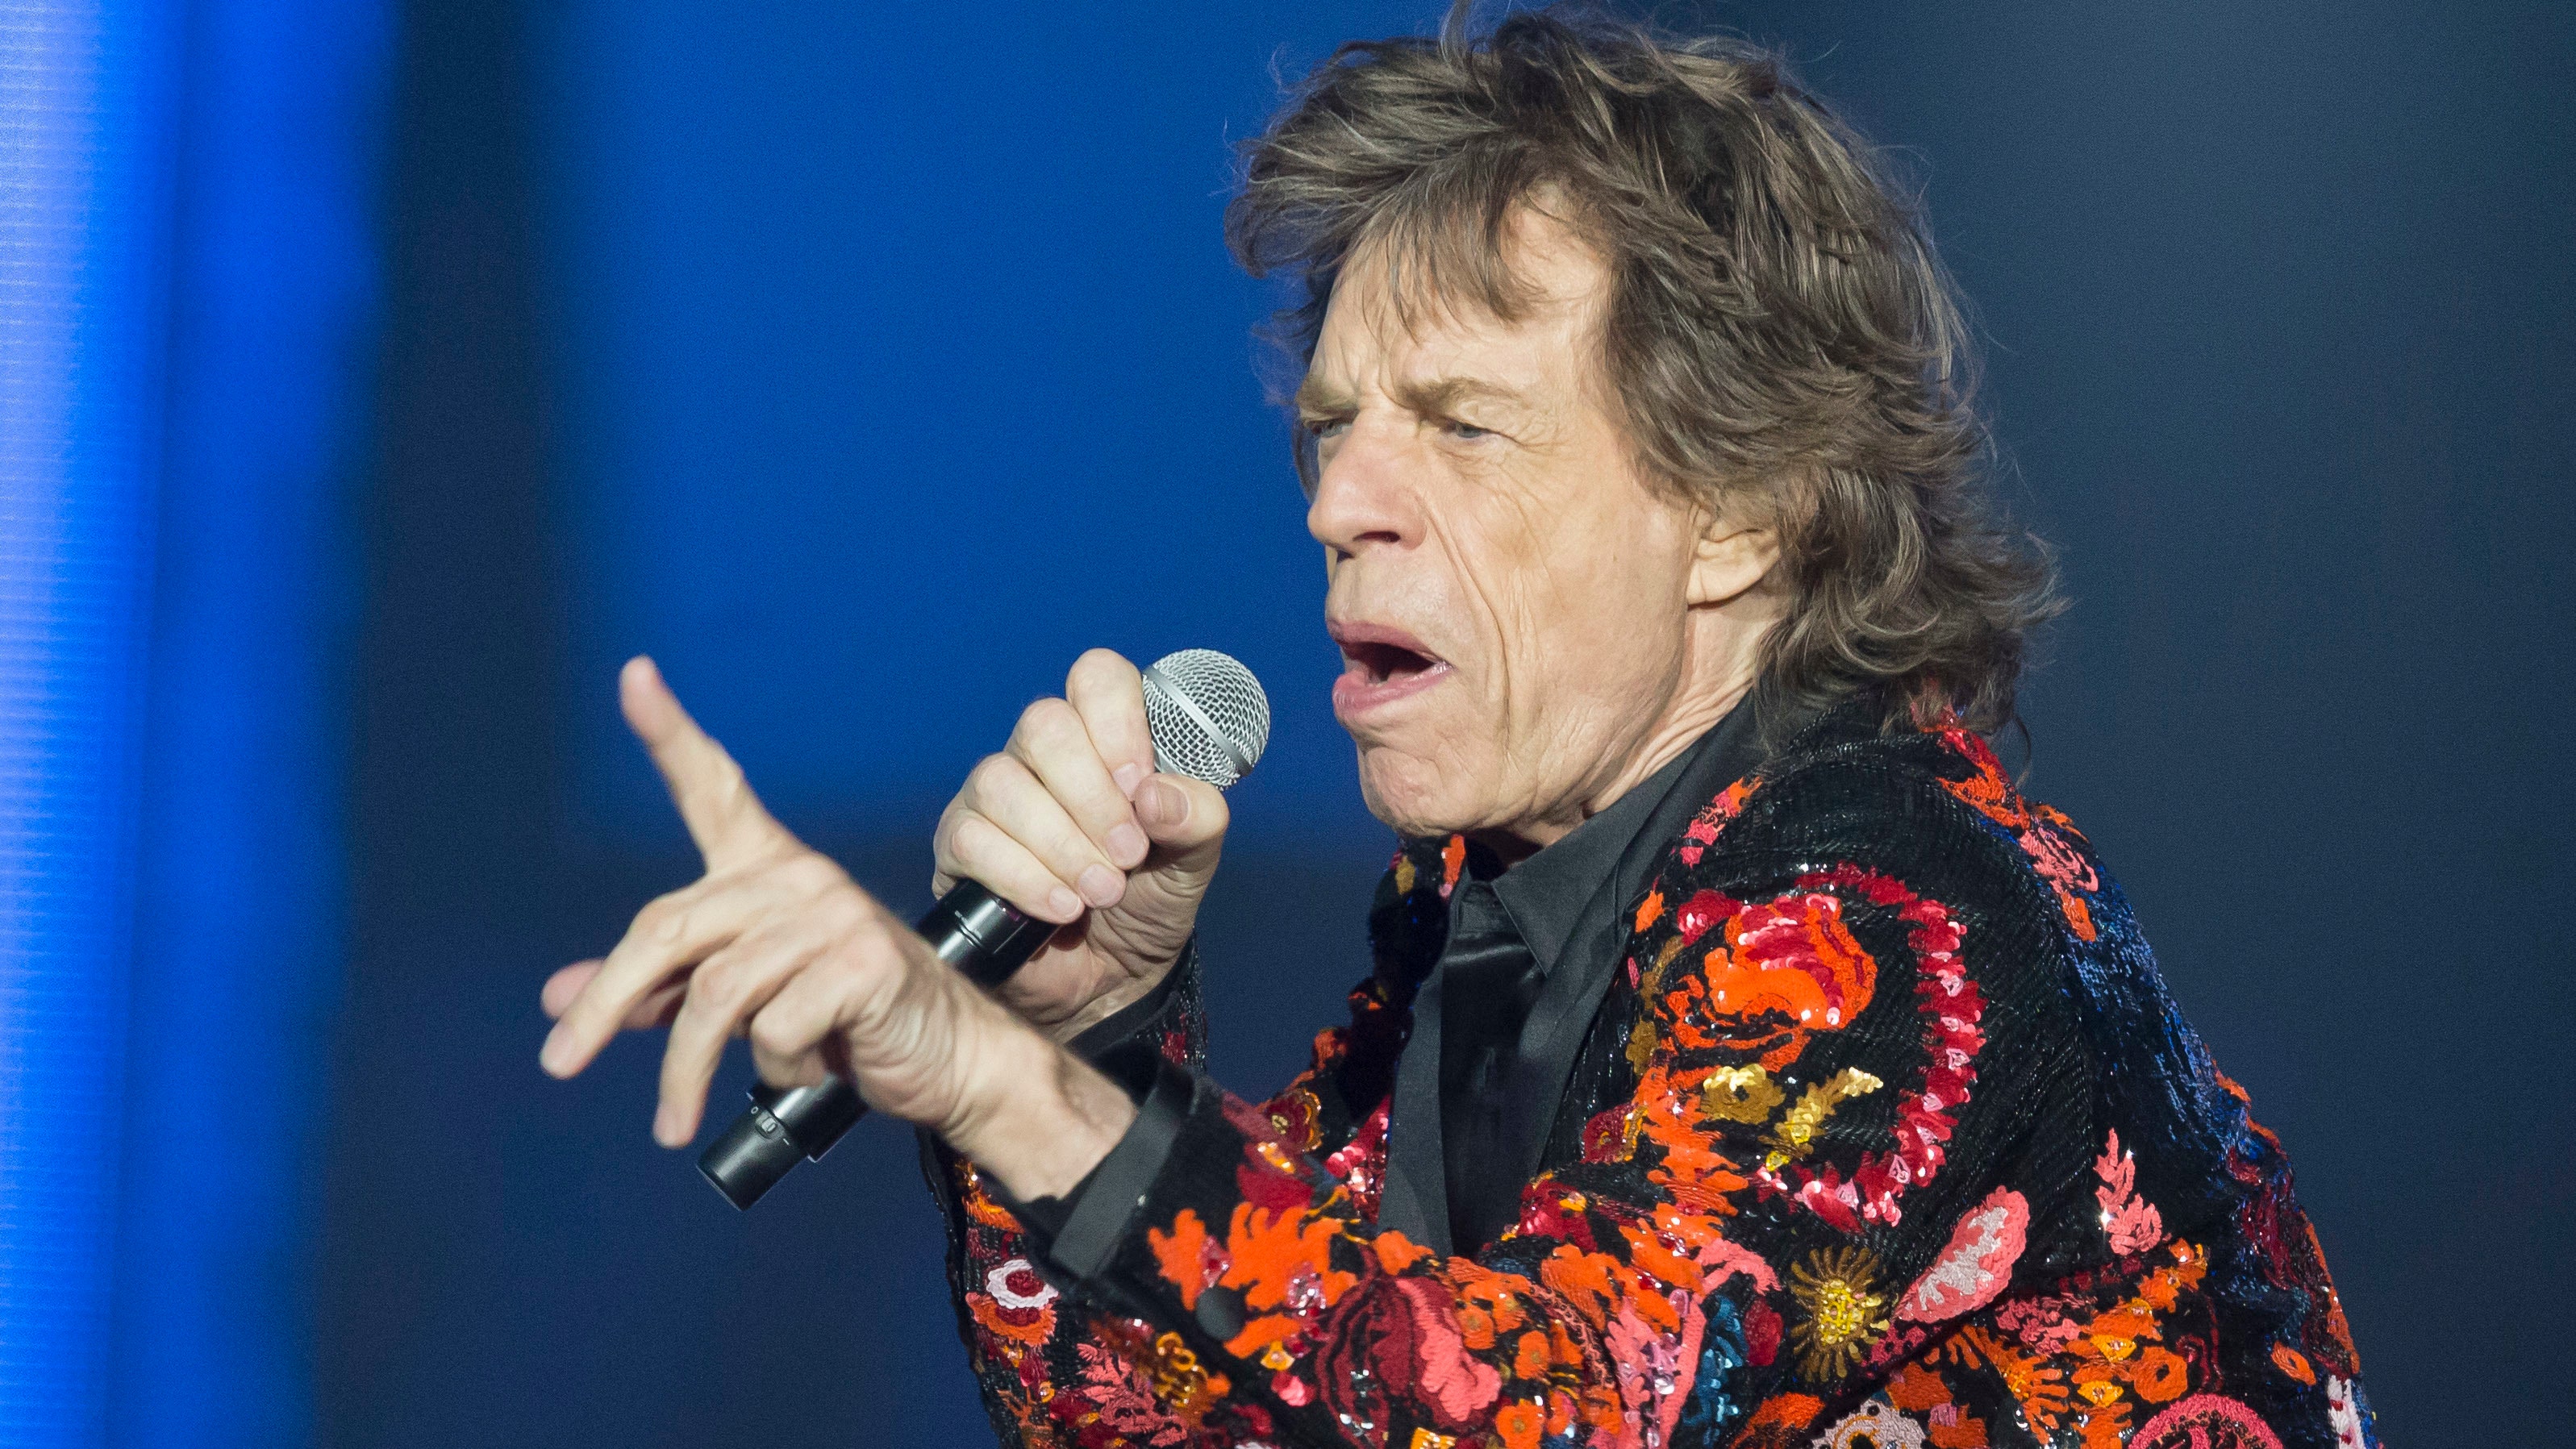 What is Mick Jagger's net worth?